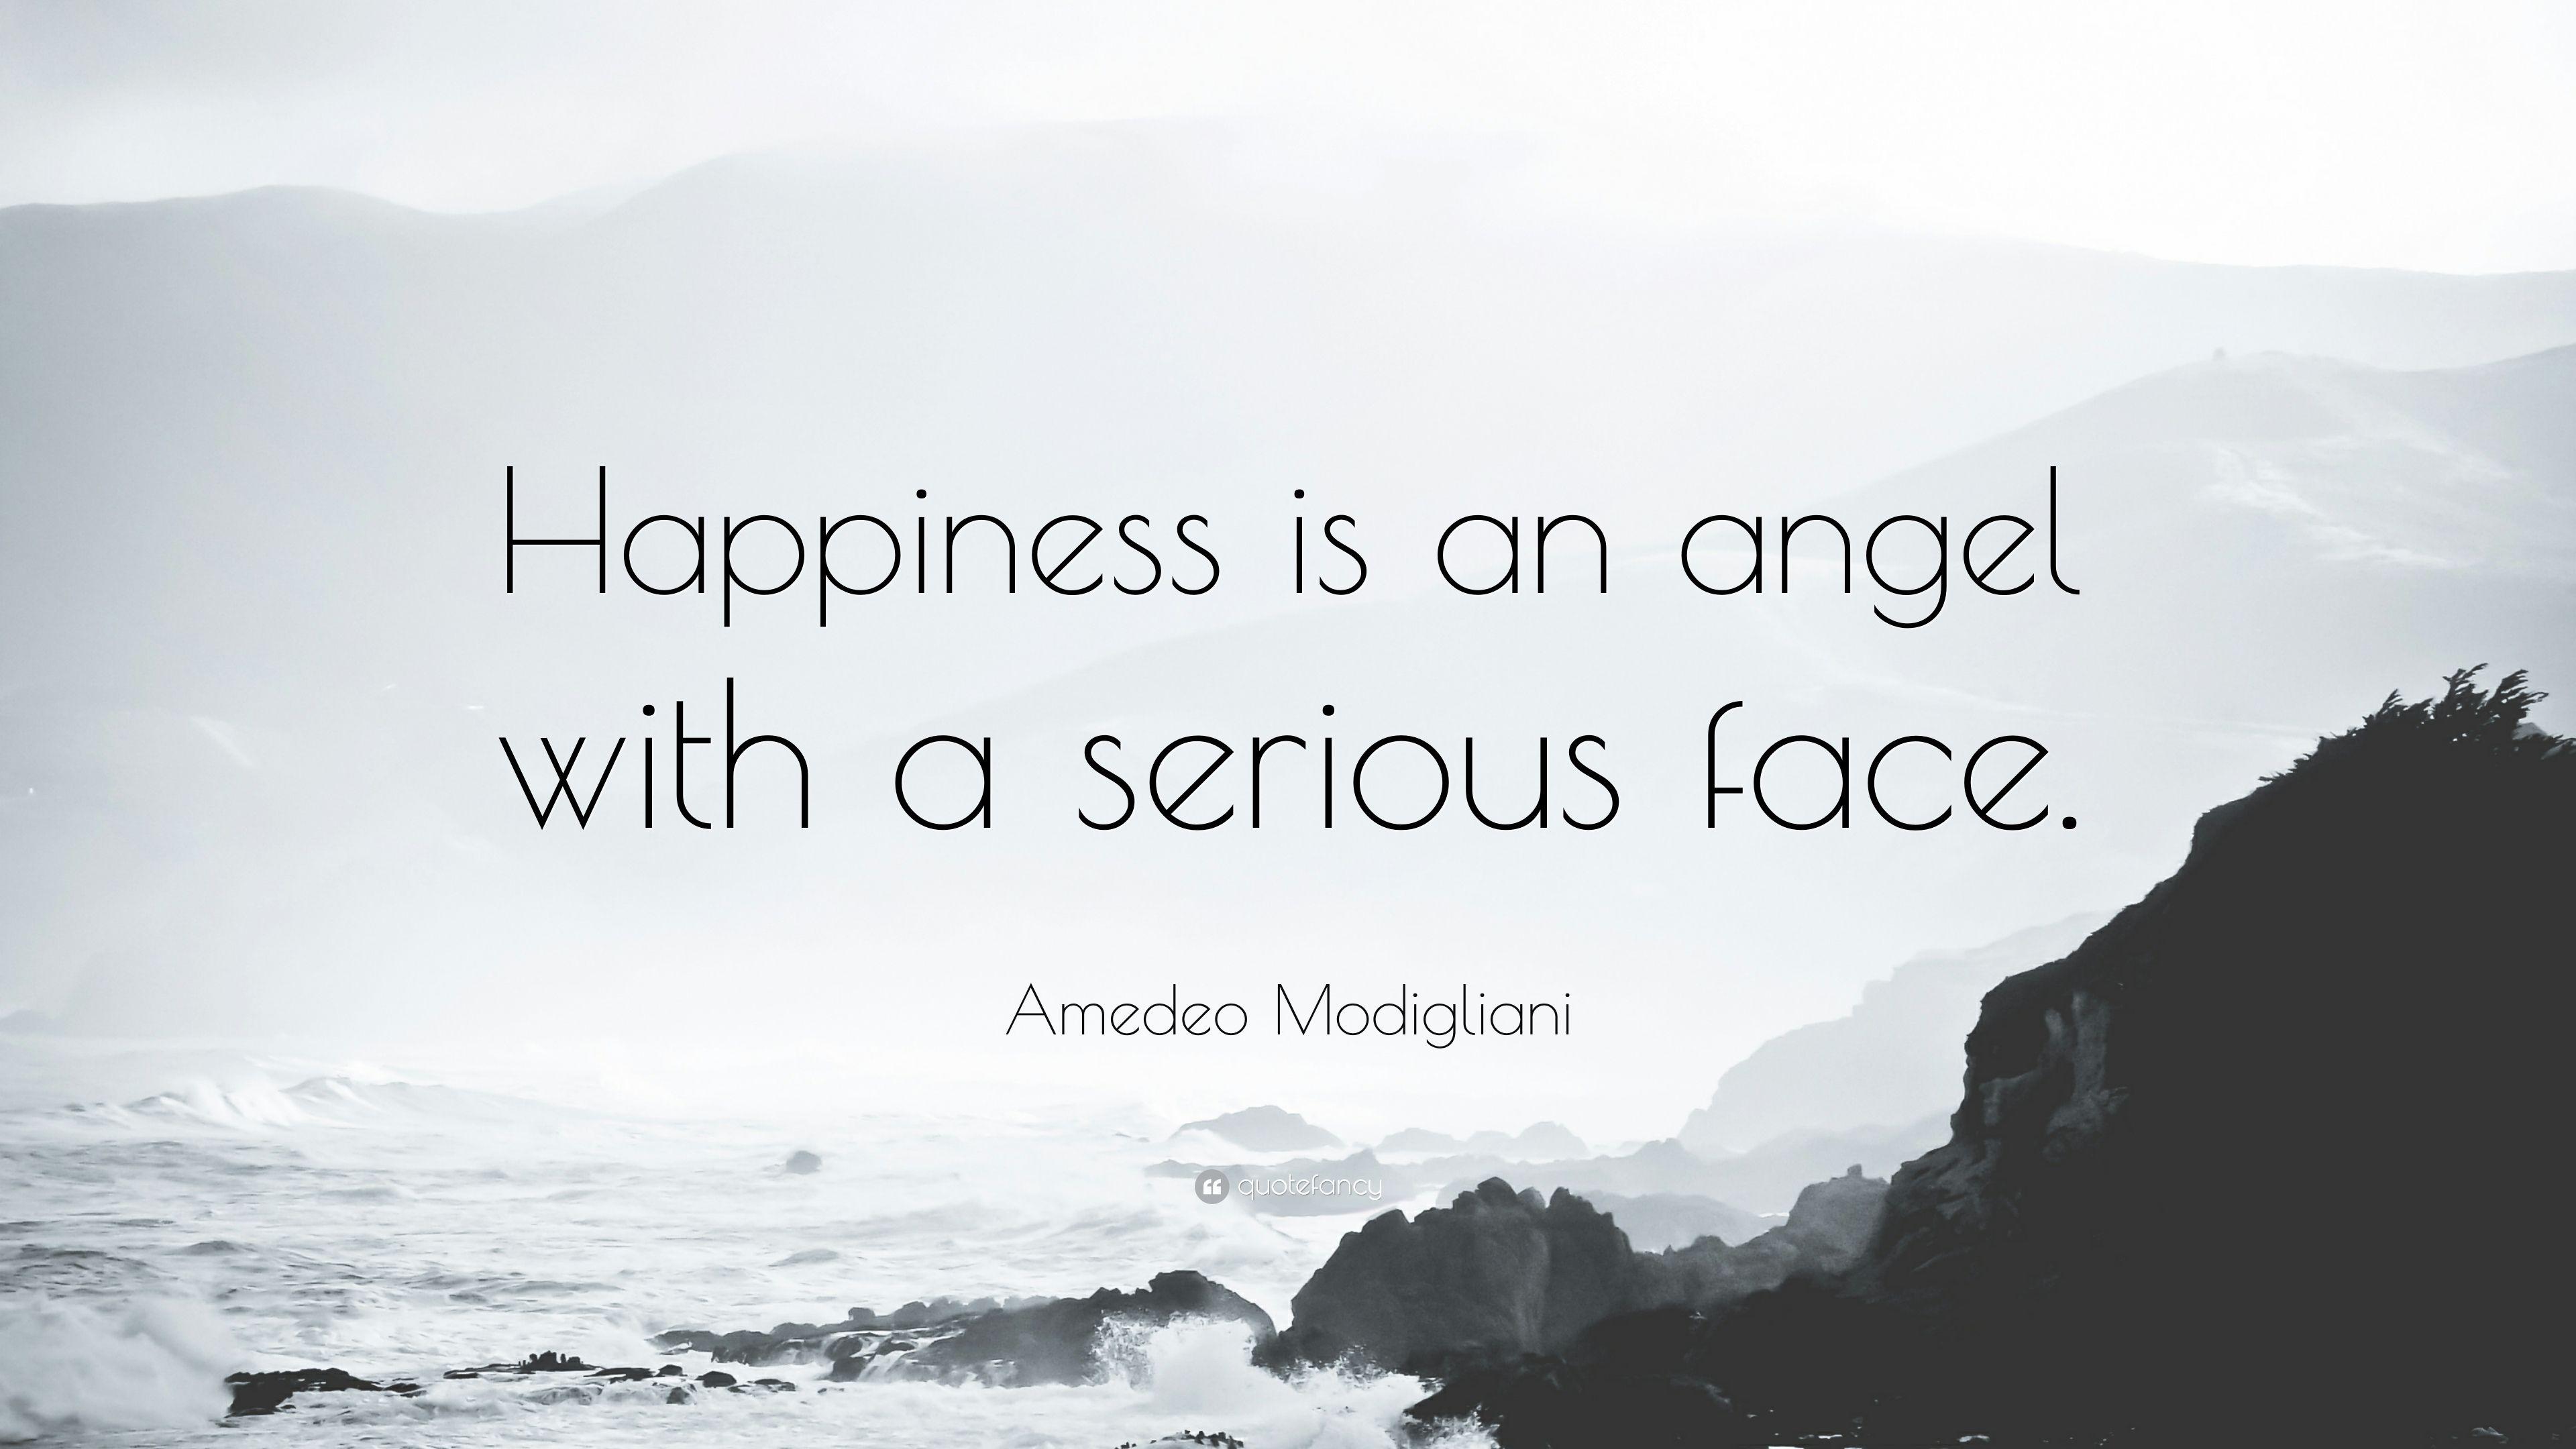 Amedeo Modigliani Quote: “Happiness is an angel with a serious face